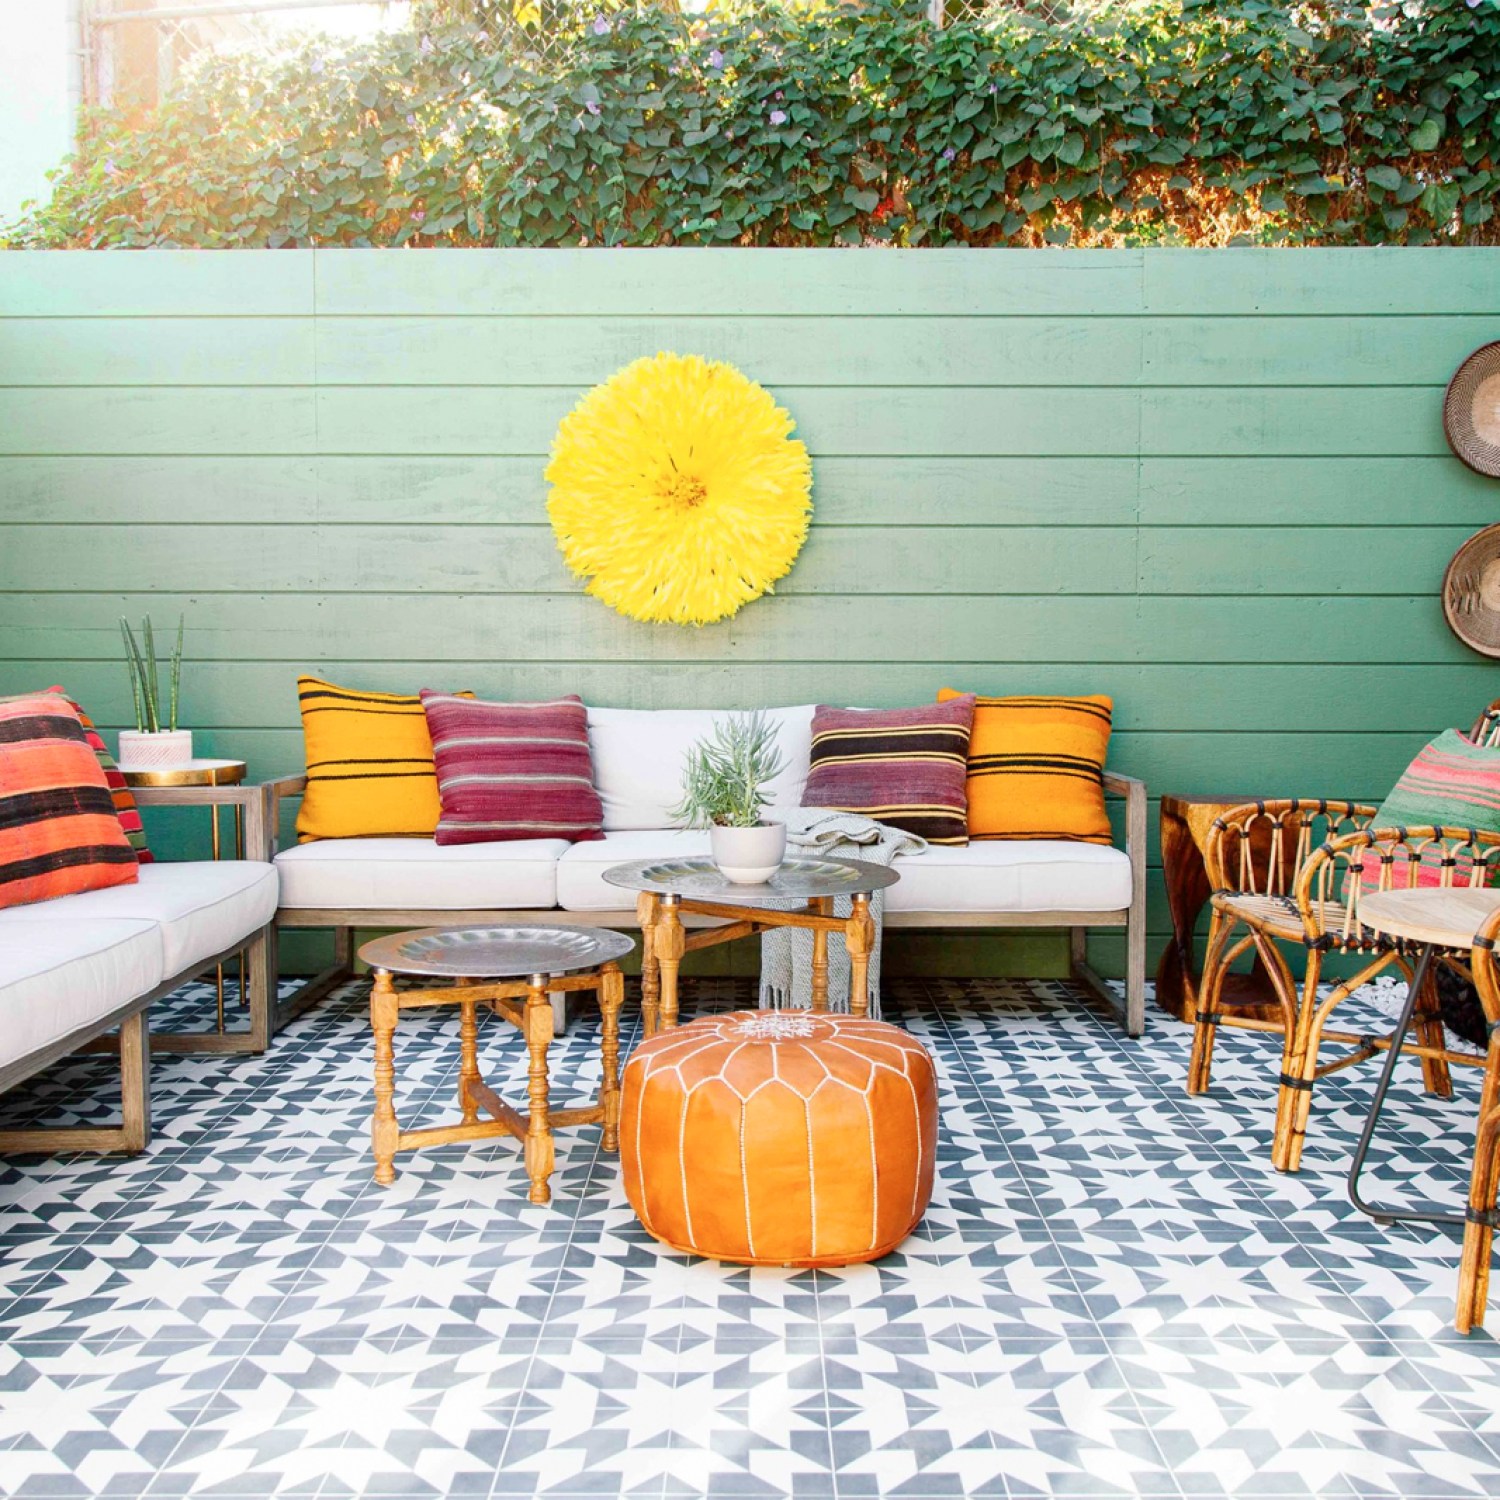 Colorful patio at a home